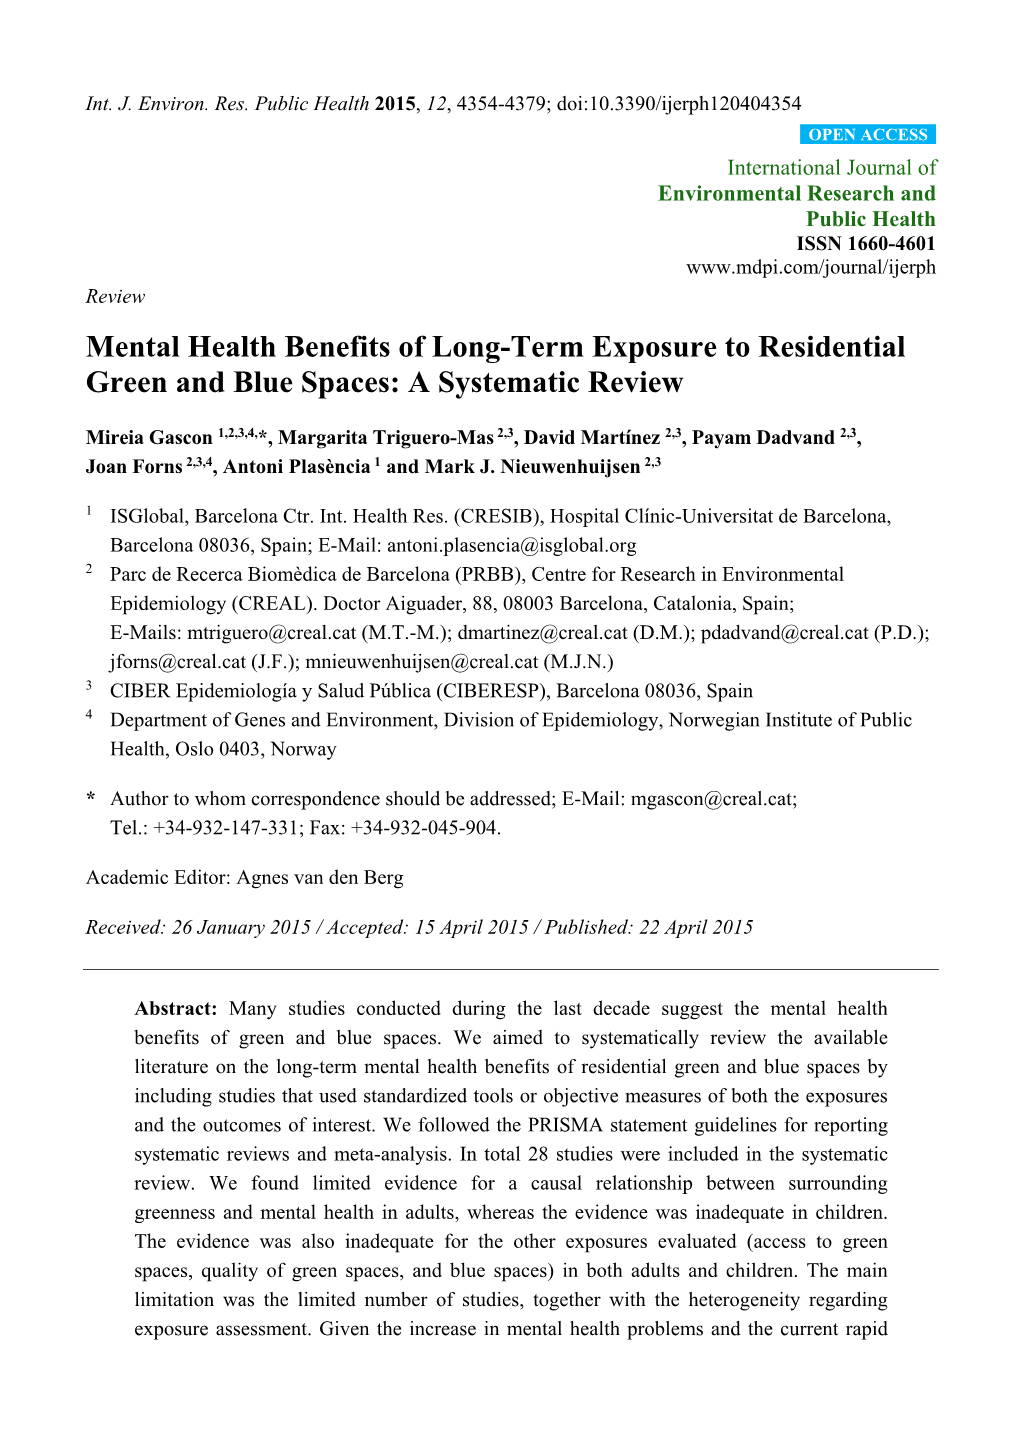 Mental Health Benefits of Long-Term Exposure to Residential Green and Blue Spaces: a Systematic Review